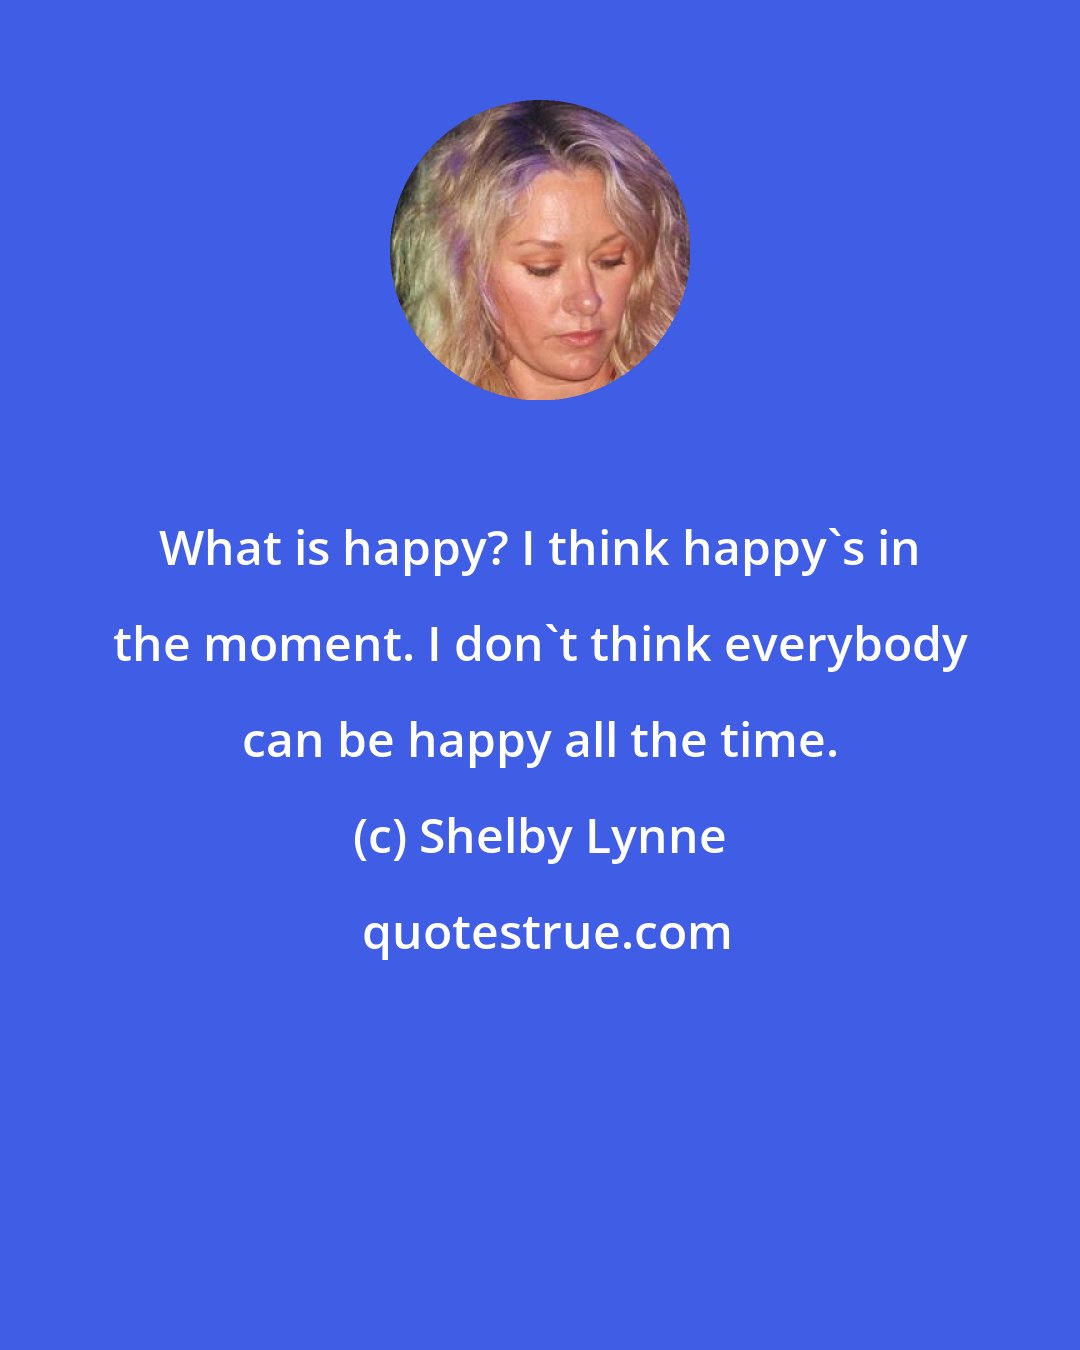 Shelby Lynne: What is happy? I think happy's in the moment. I don't think everybody can be happy all the time.